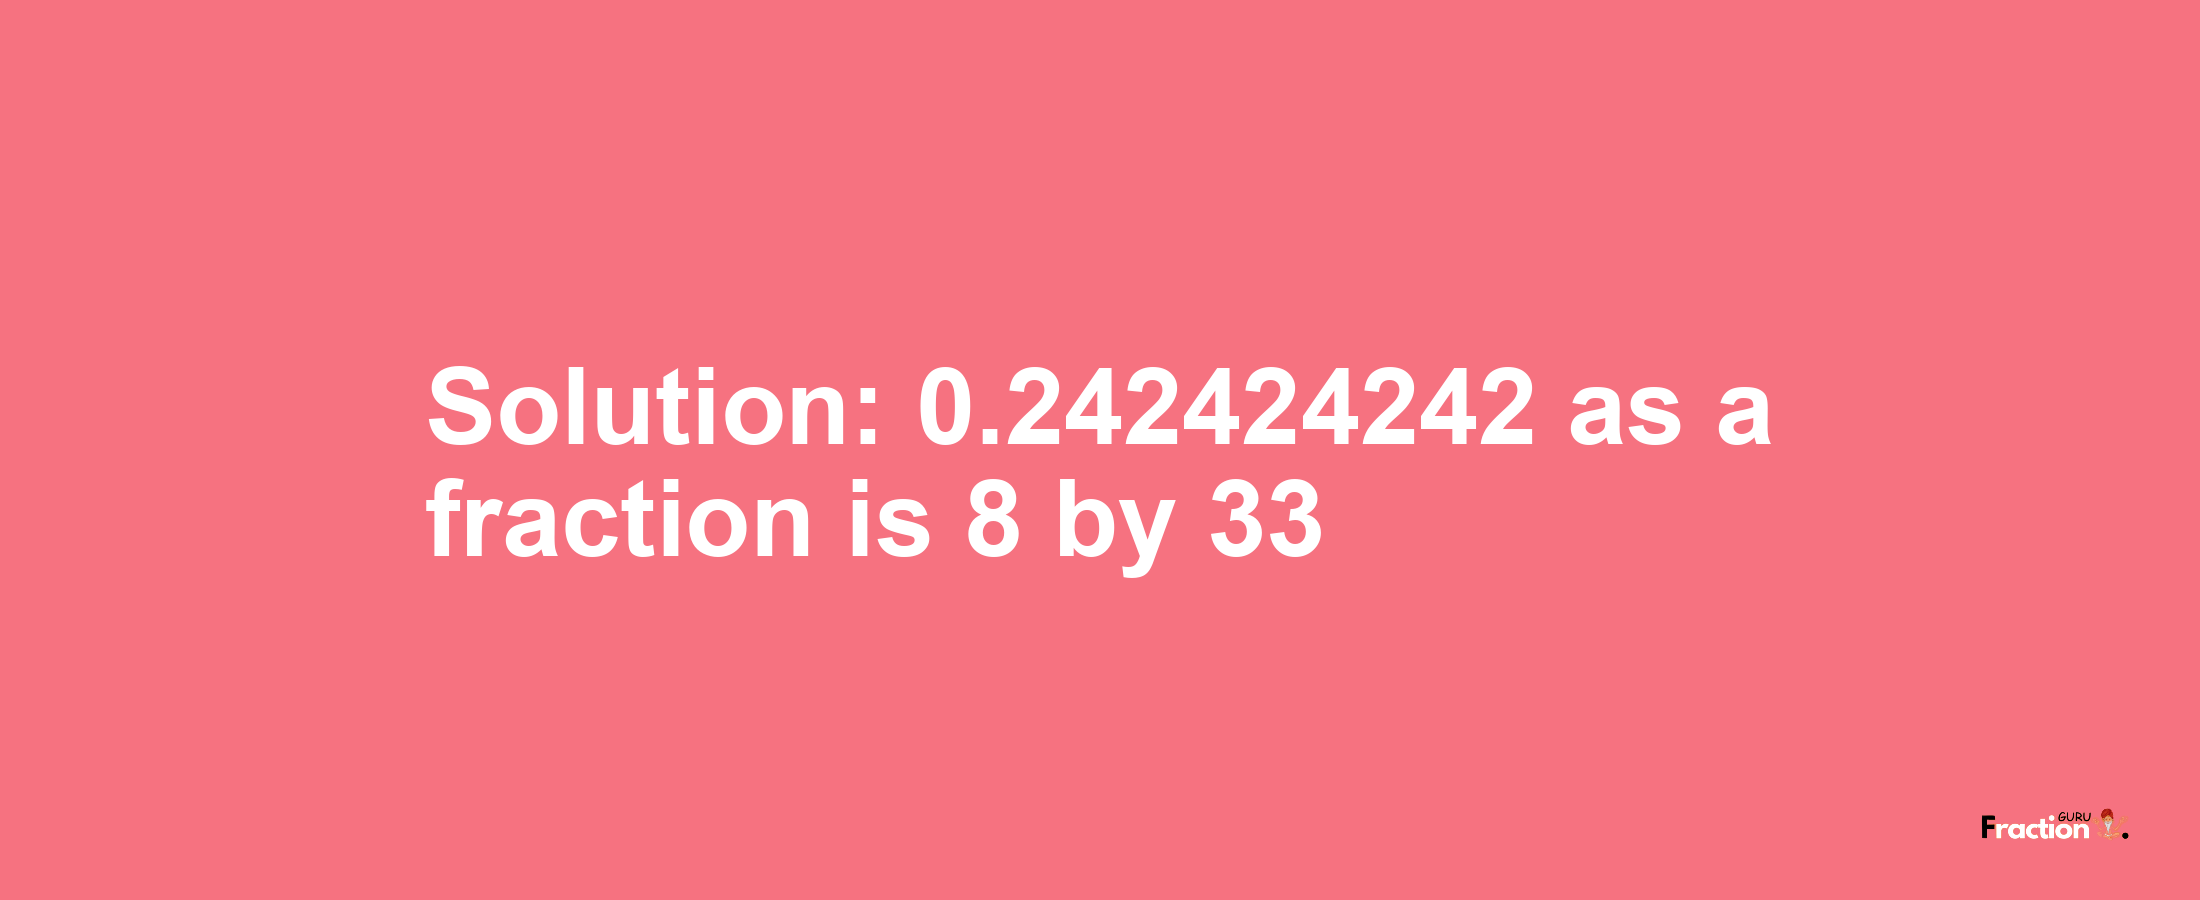 Solution:0.242424242 as a fraction is 8/33